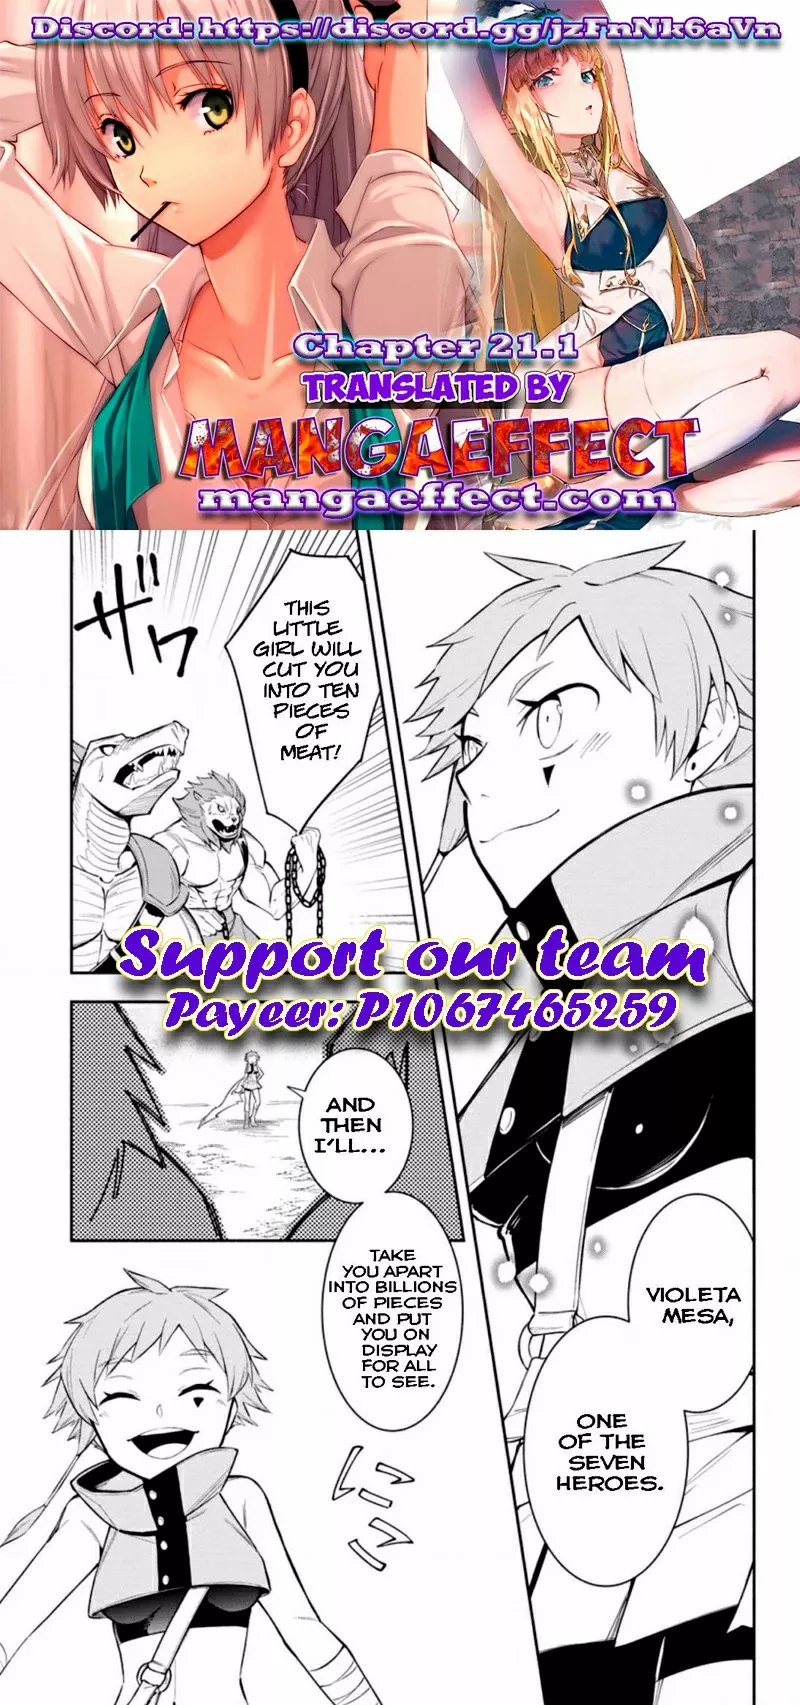 My Lover Was Stolen, And I Was Kicked Out Of The Hero’s Party chapter 21.1 - page 2